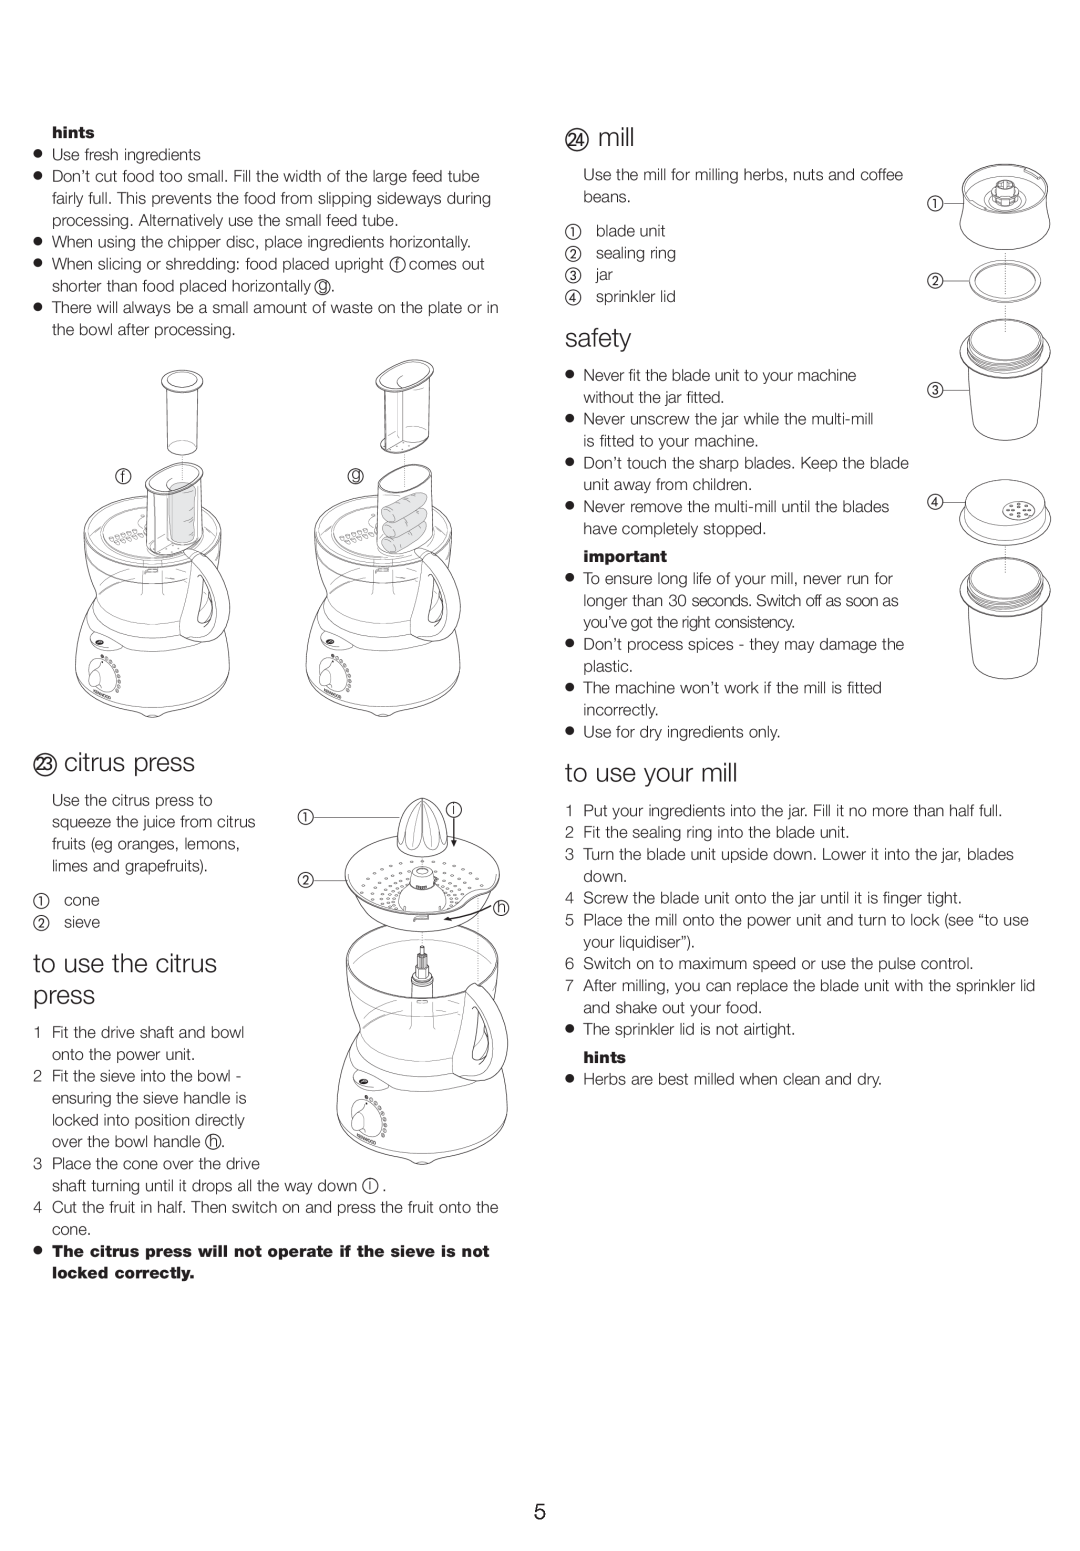 Kenwood FP582 manual to use your mill, to use the citrus press, safety 